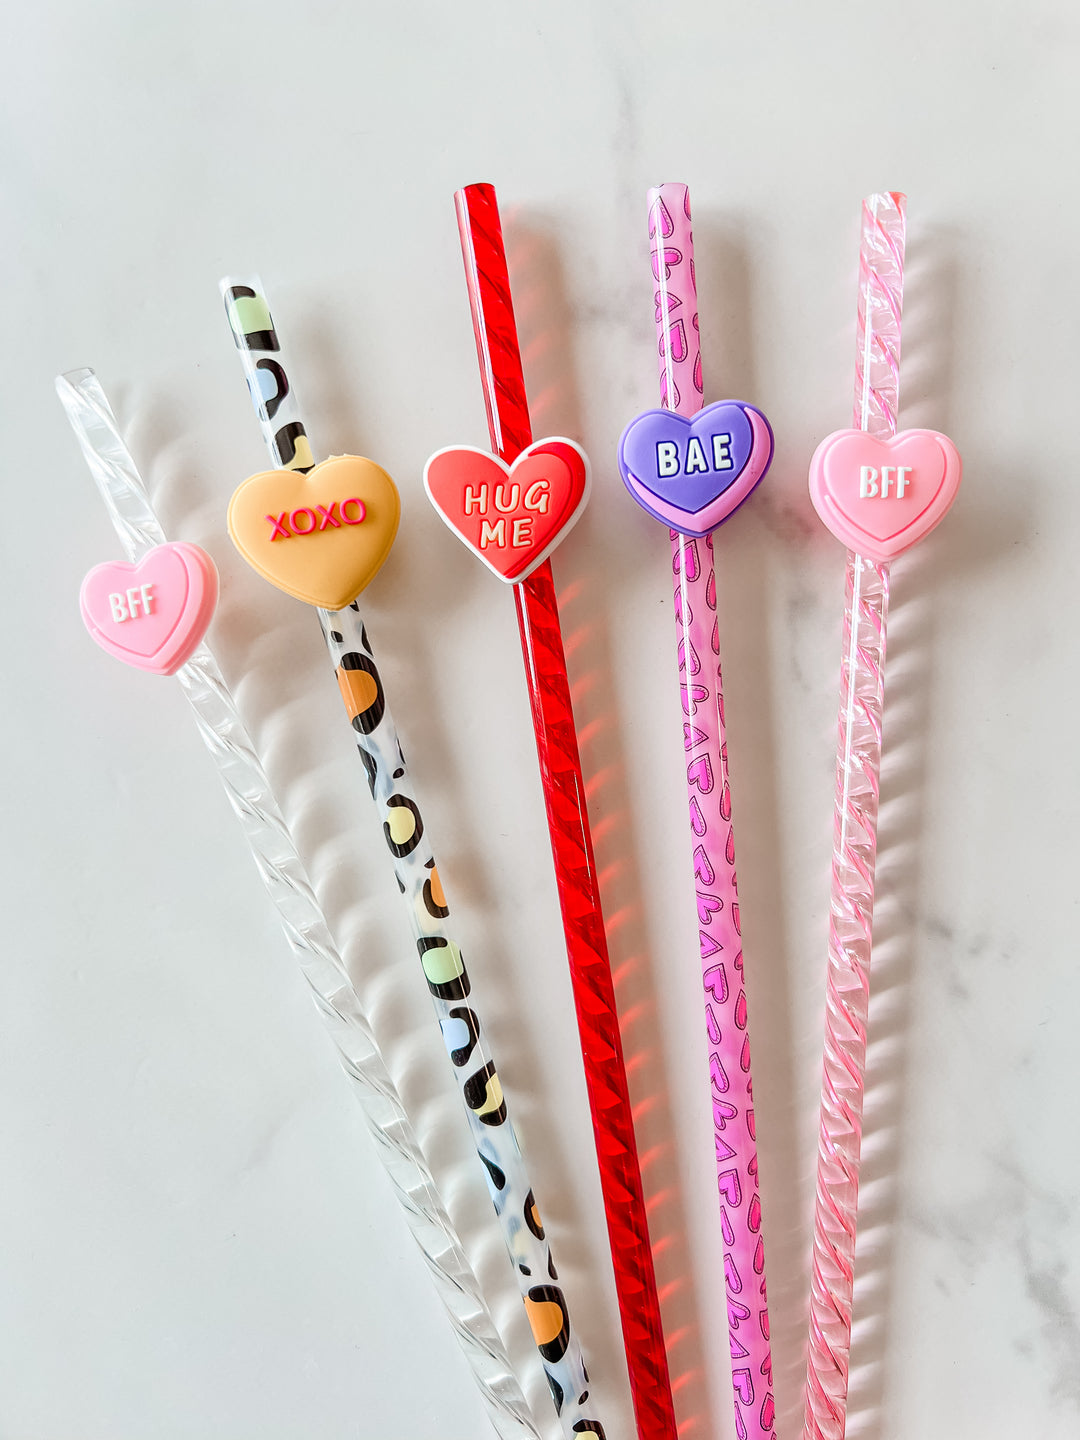 Gibleitz Bulk Straw Topper Random Different 30Pack Straw Charms for Tumbler  Straws Cute Colorful PVC Decorative Straw Toppers for 0.23in-0.31inch